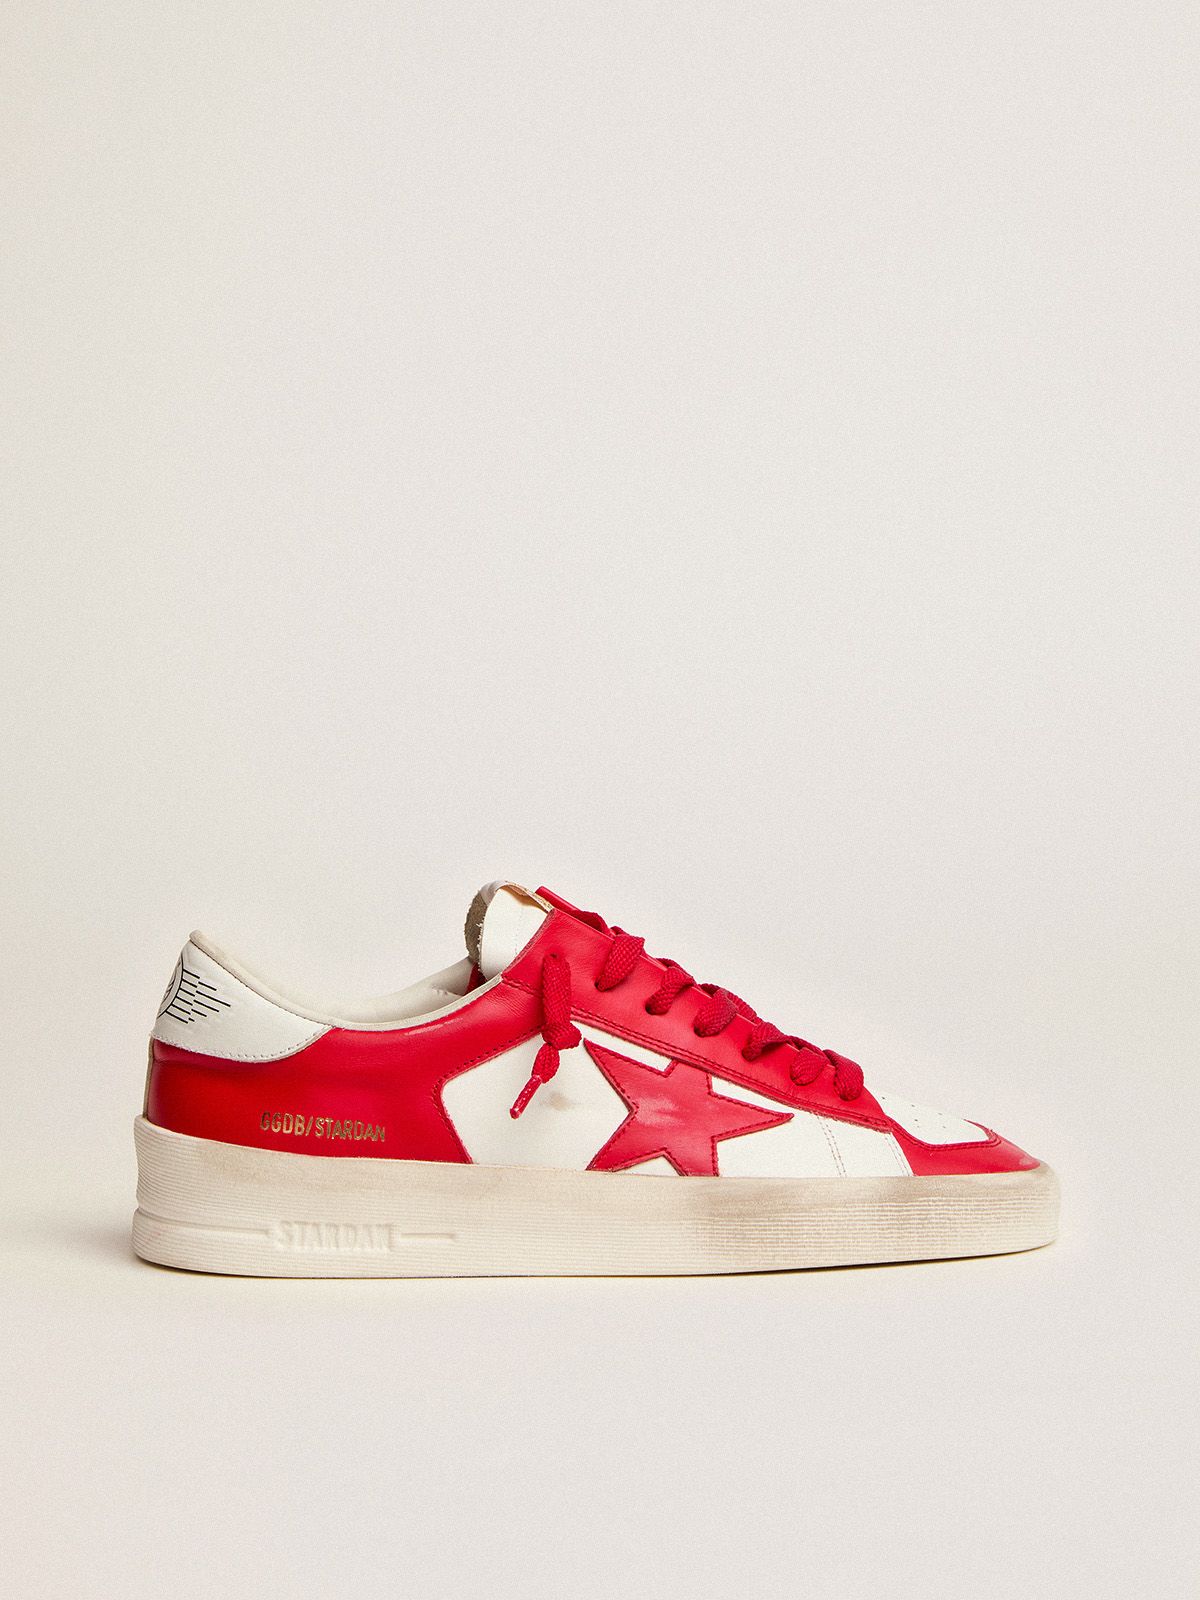 Stardan sneakers in white and red leather